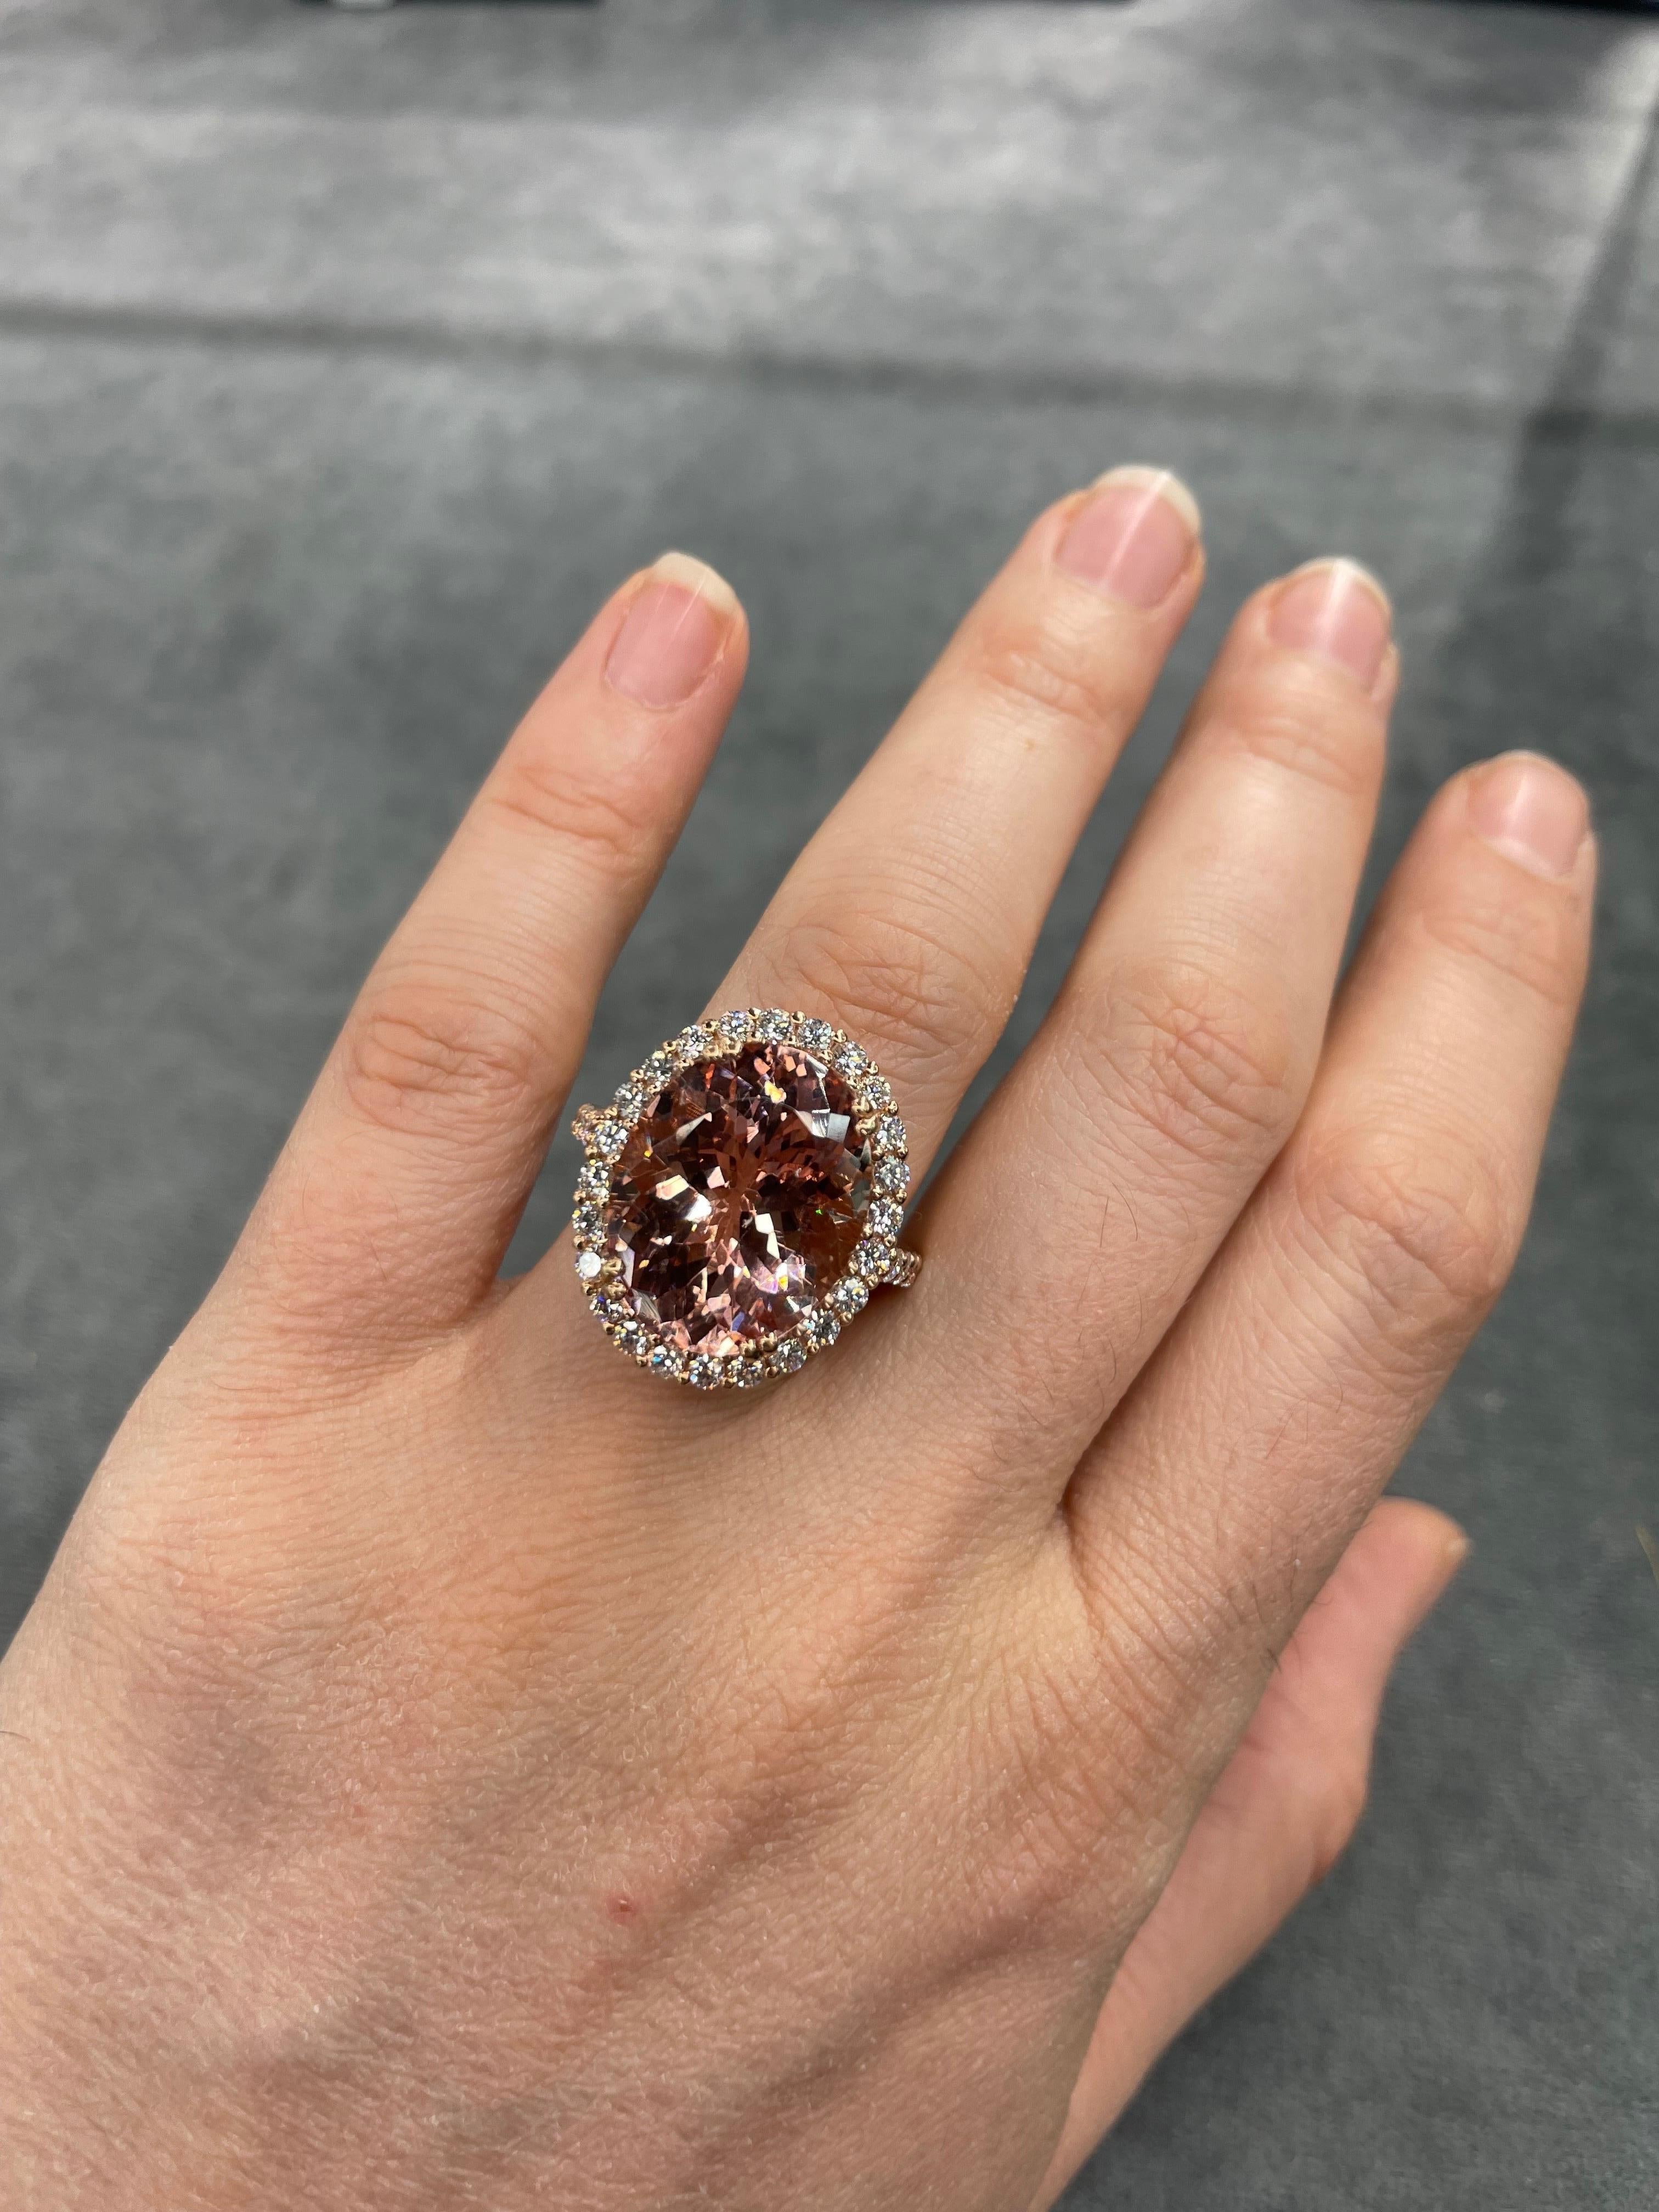 18 Karat Rose Gold cocktail ring featuring one Pink Salmon color Morganite weighing 11.62 Carats flanked with 34 round brilliants weighing 1.37 carats.

Morganite Measurements:
L: 17.8 MM
W: 14.6 MM

DOUBLE CHECK
Diamond Halo
L: 22.1 MM
W: 18.2 MM